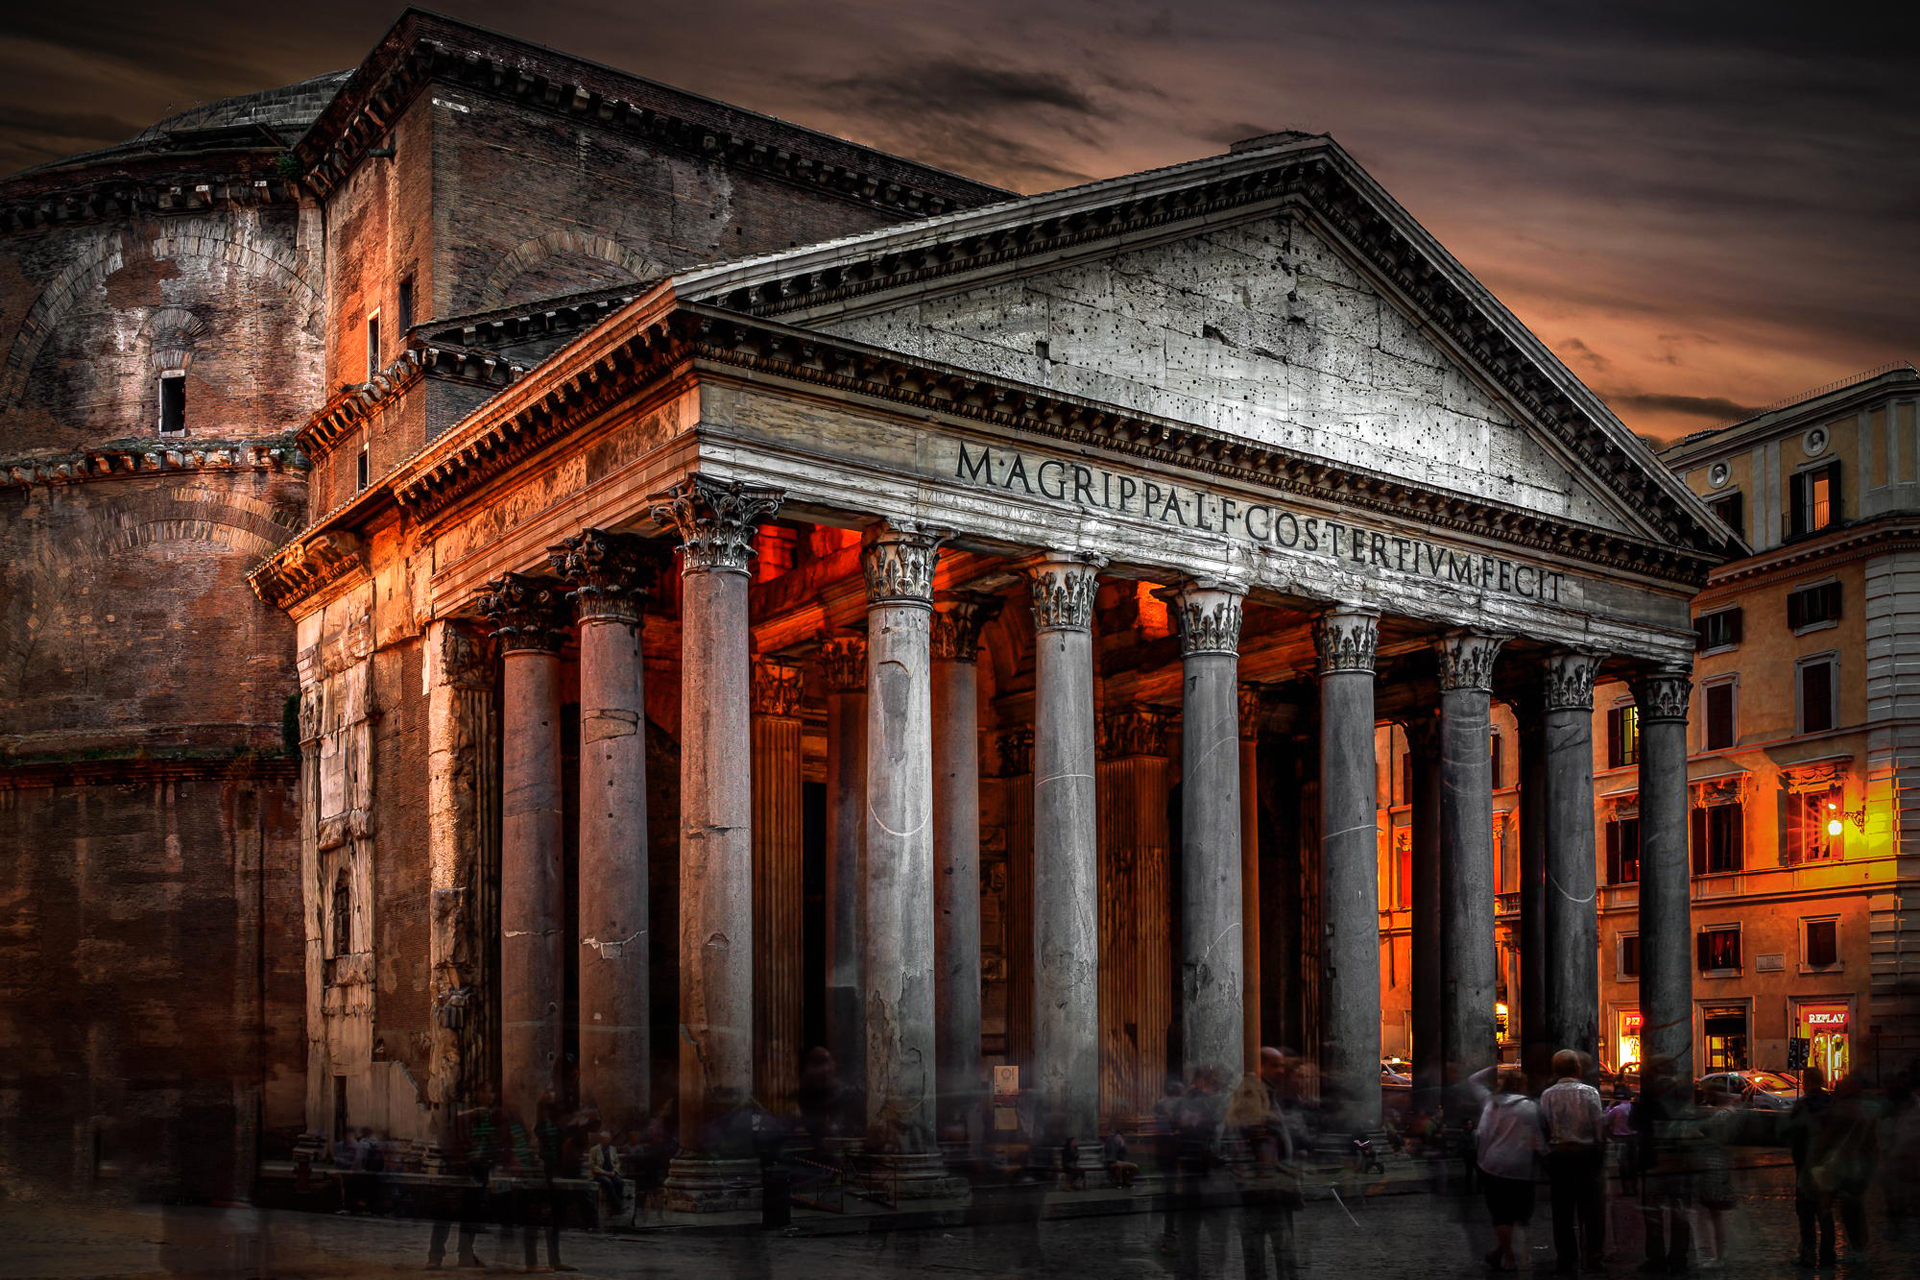 rome, pantheon, italy, man made, monument, time lapse phone background